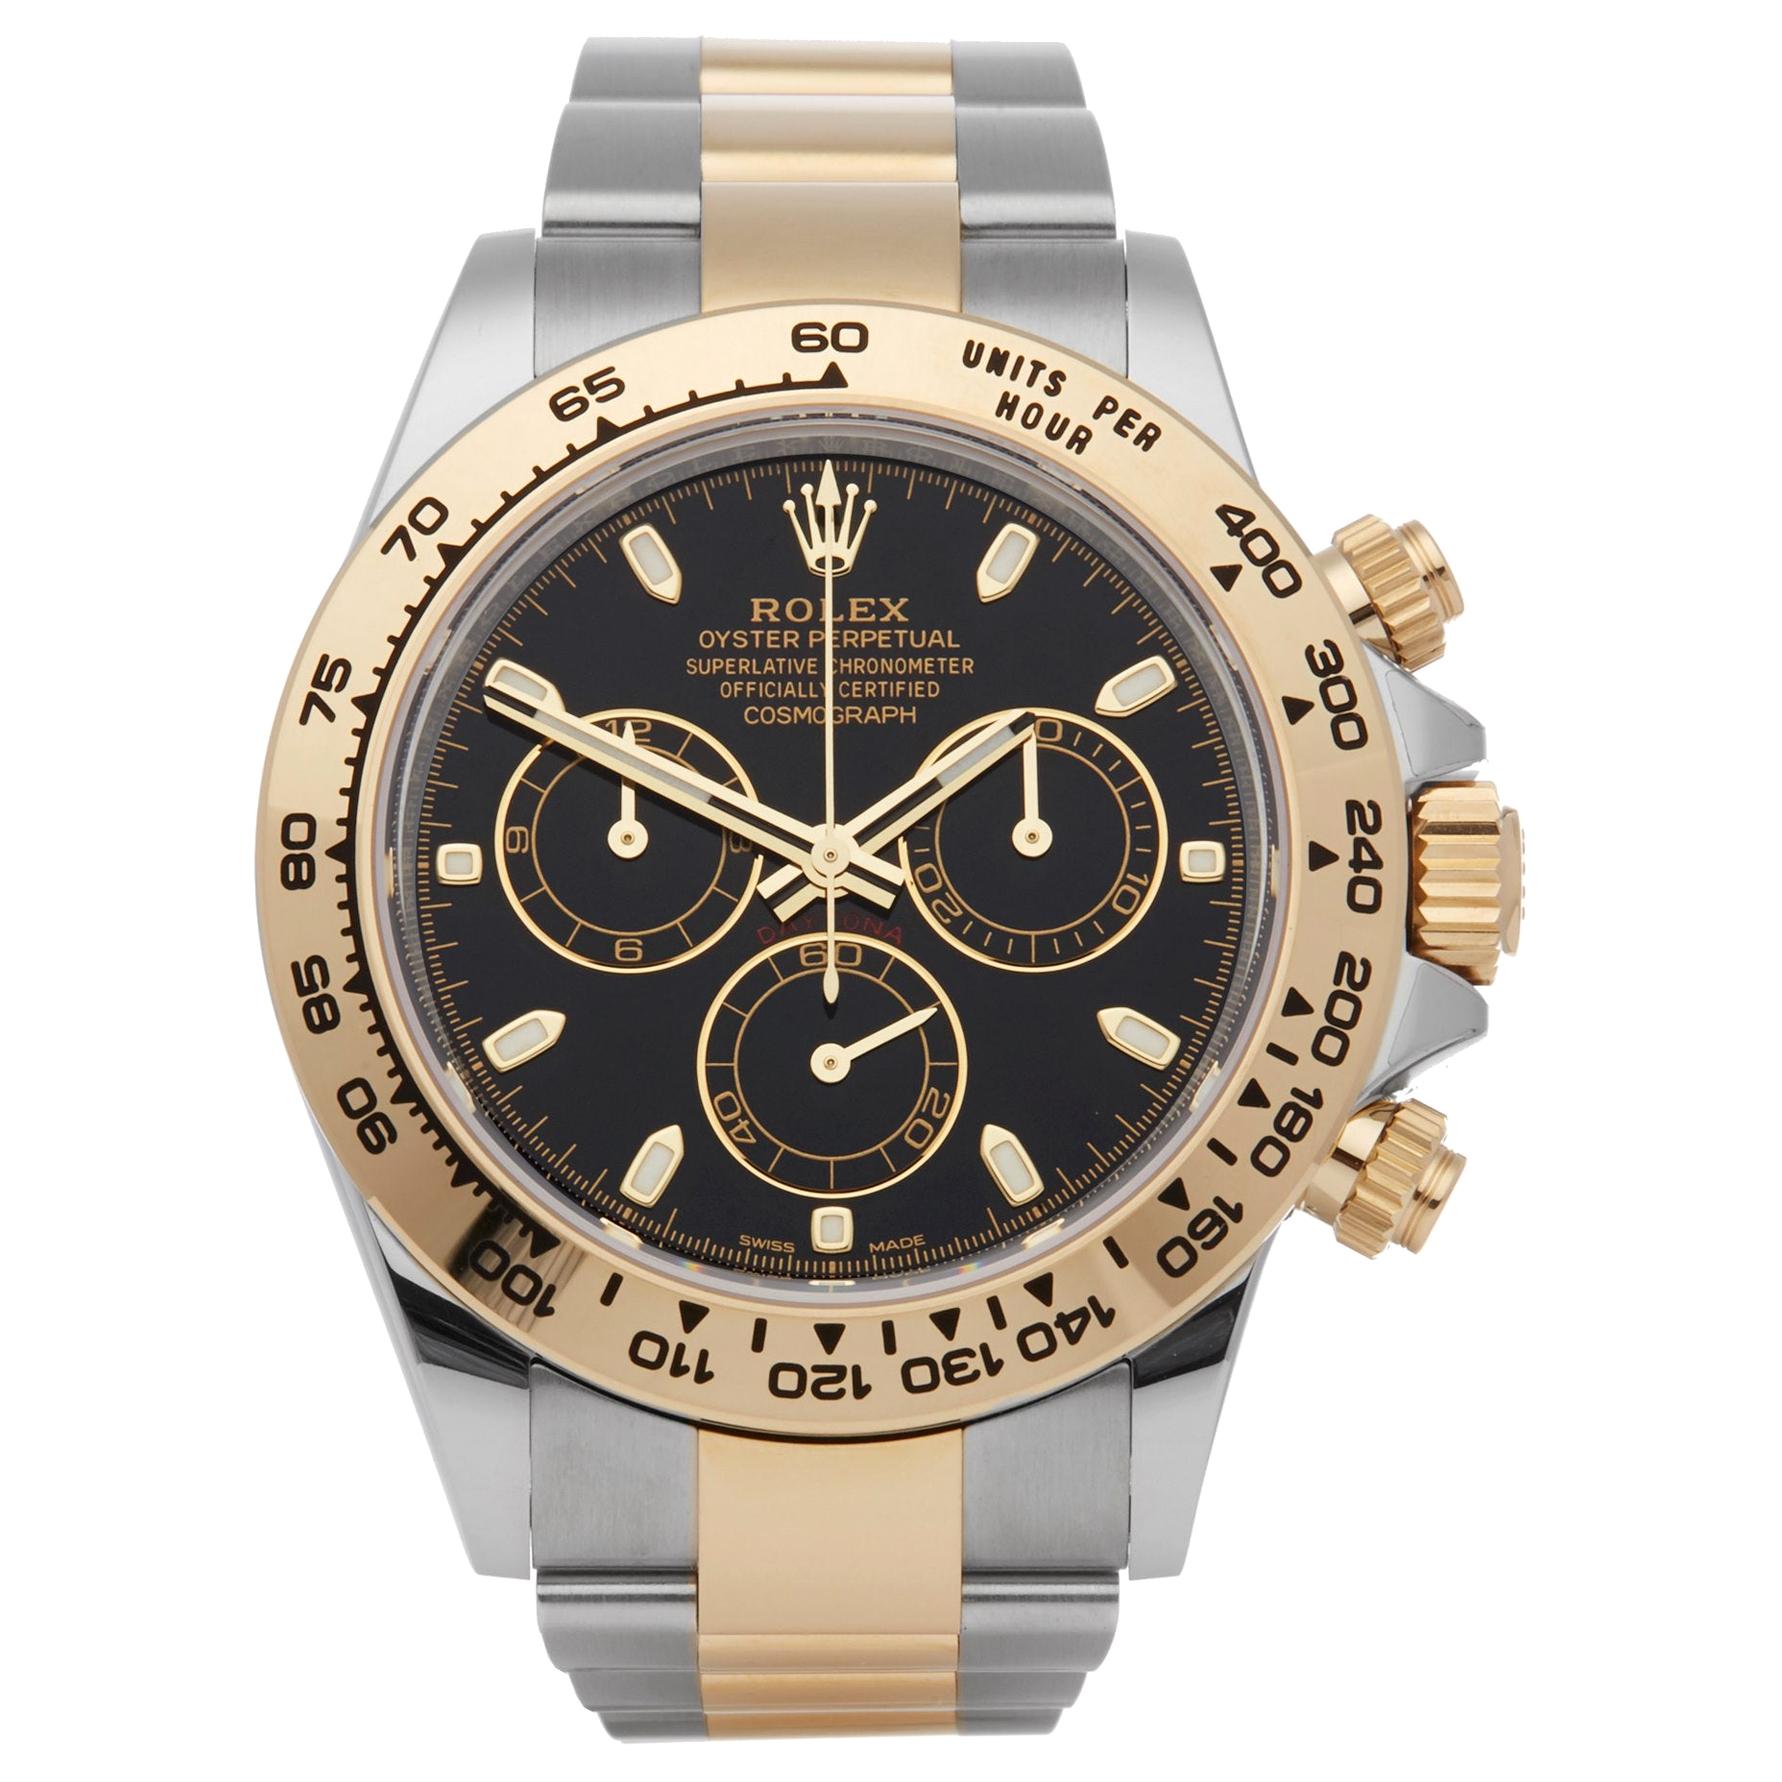 Rolex Daytona 0 116503 Men Stainless Steel and Yellow Gold Cosmograph Watch